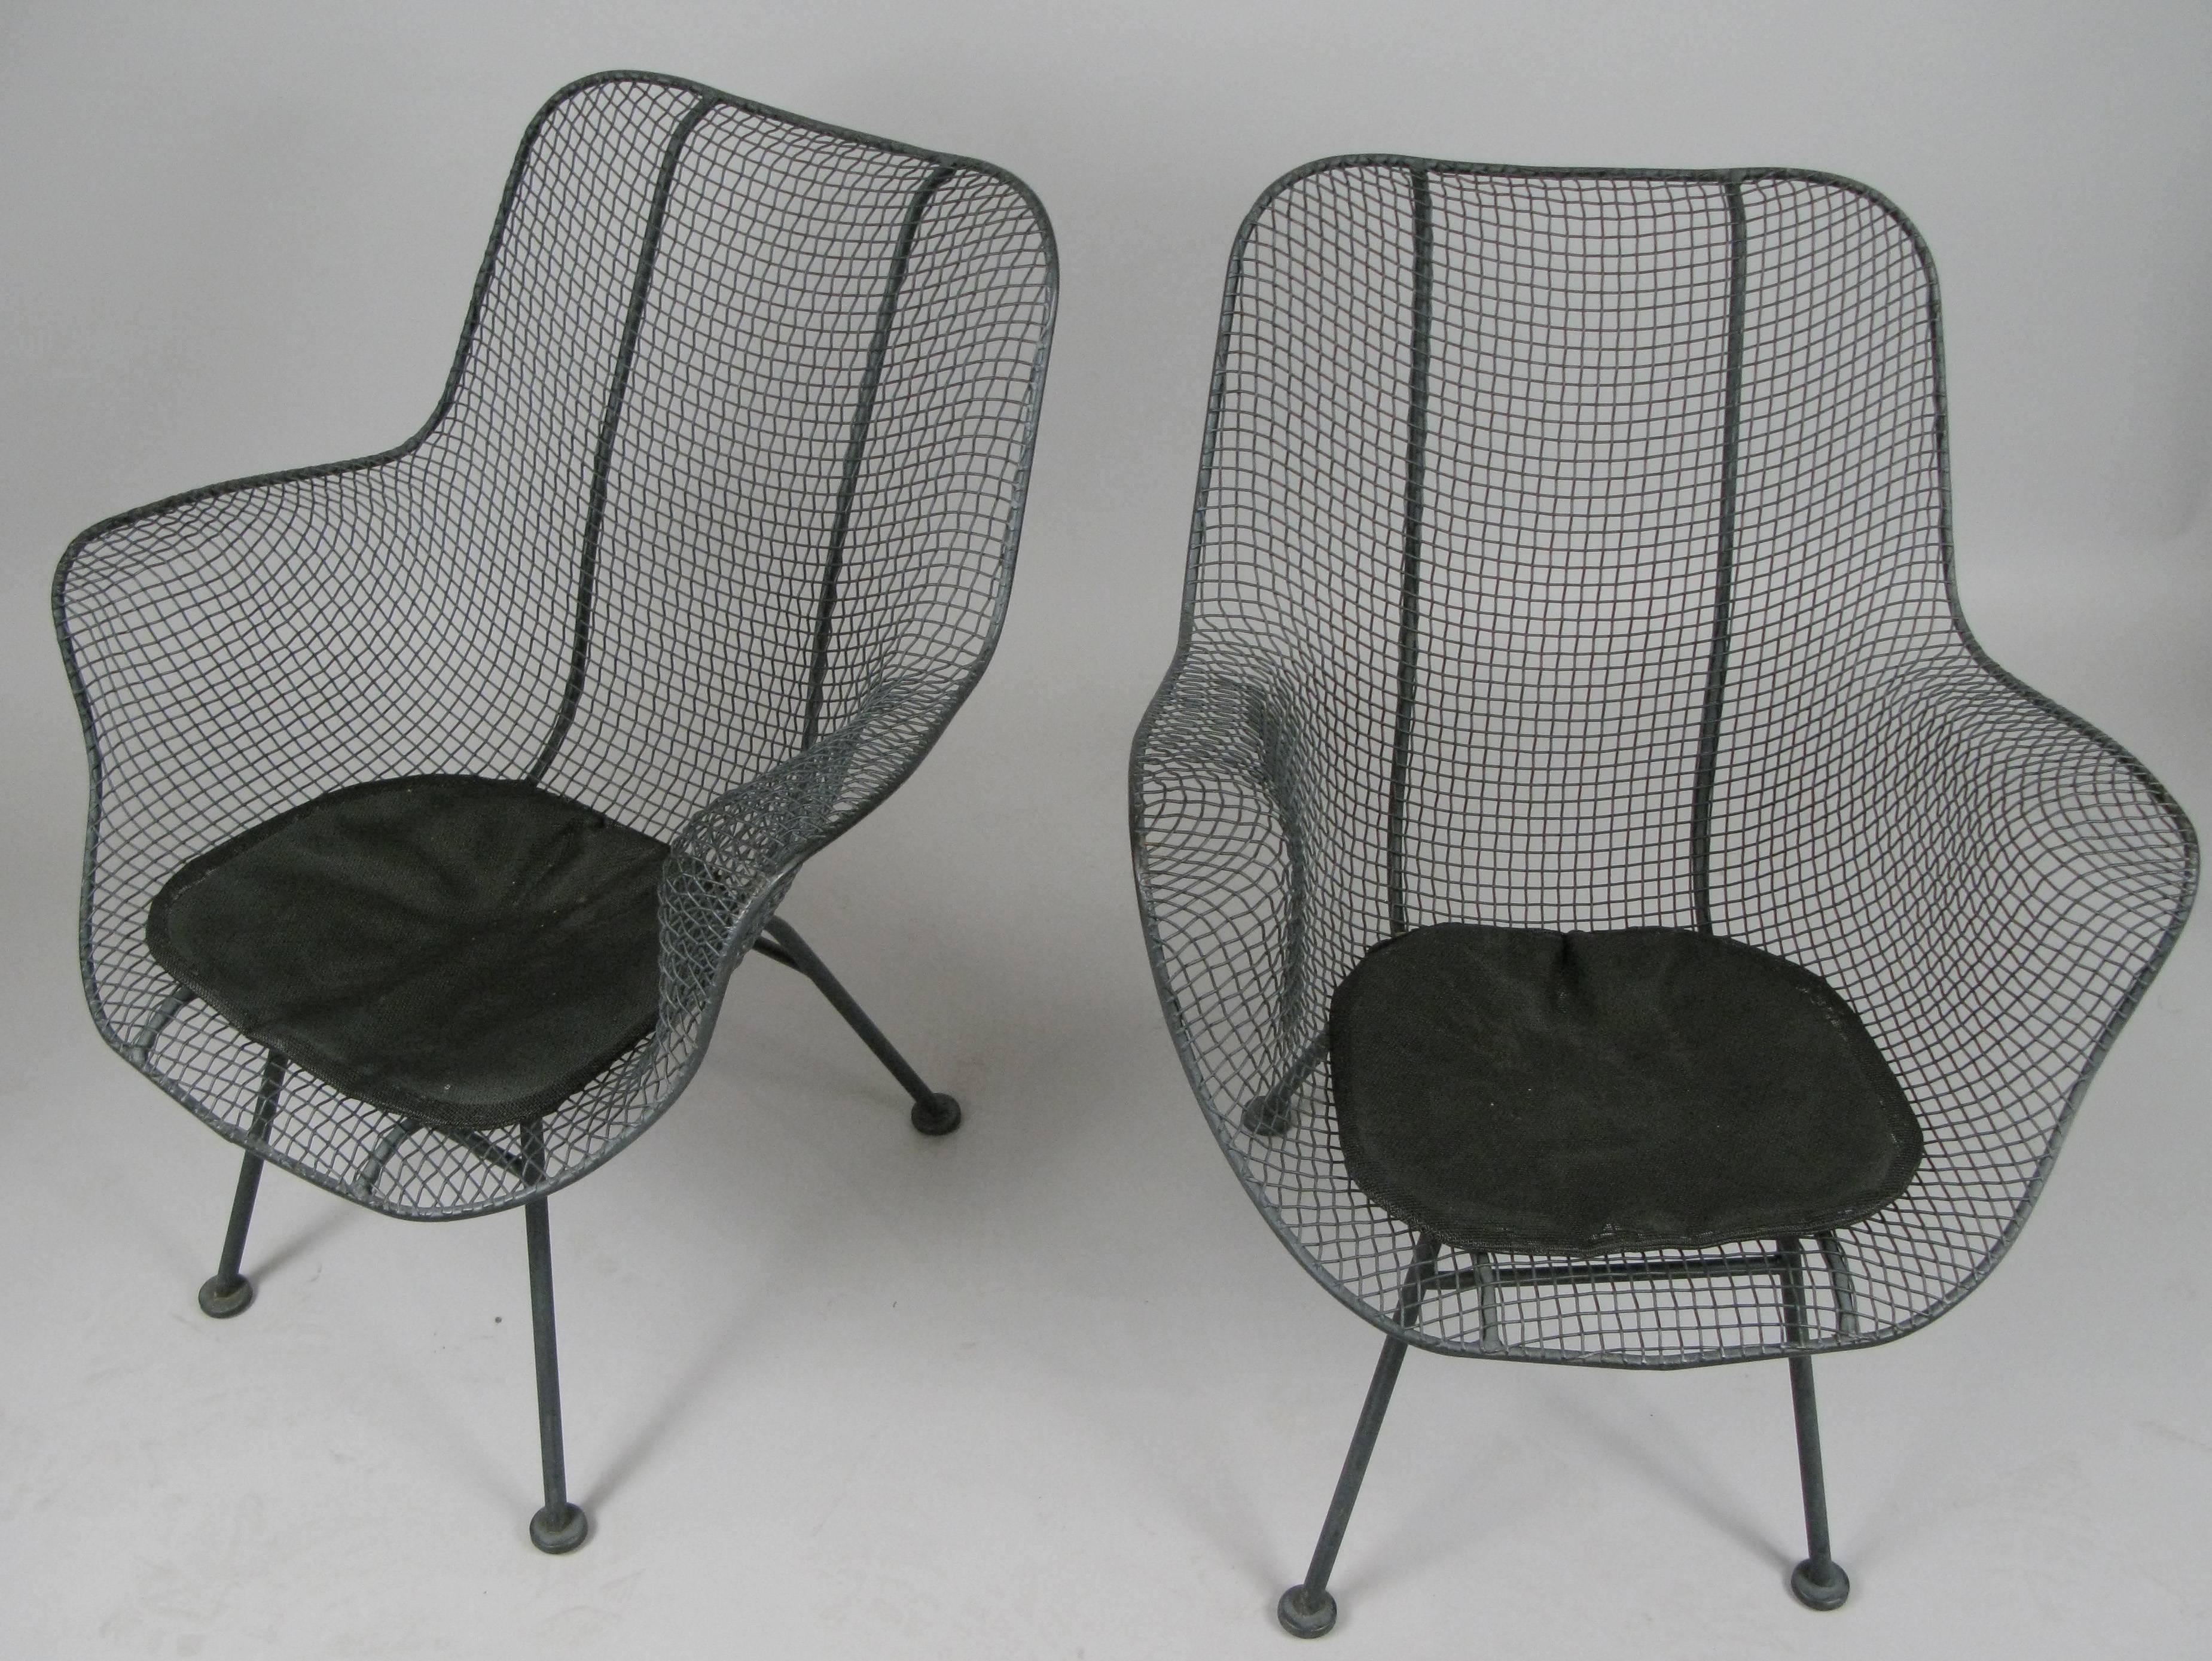 A vintage pair of high back vintage Woodard Sculptura armchairs, with the original dark grey finish in mint condition and the original seat pads as well. Comfortable and stylish, beautiful examples of these Classic chairs. We always have a variety